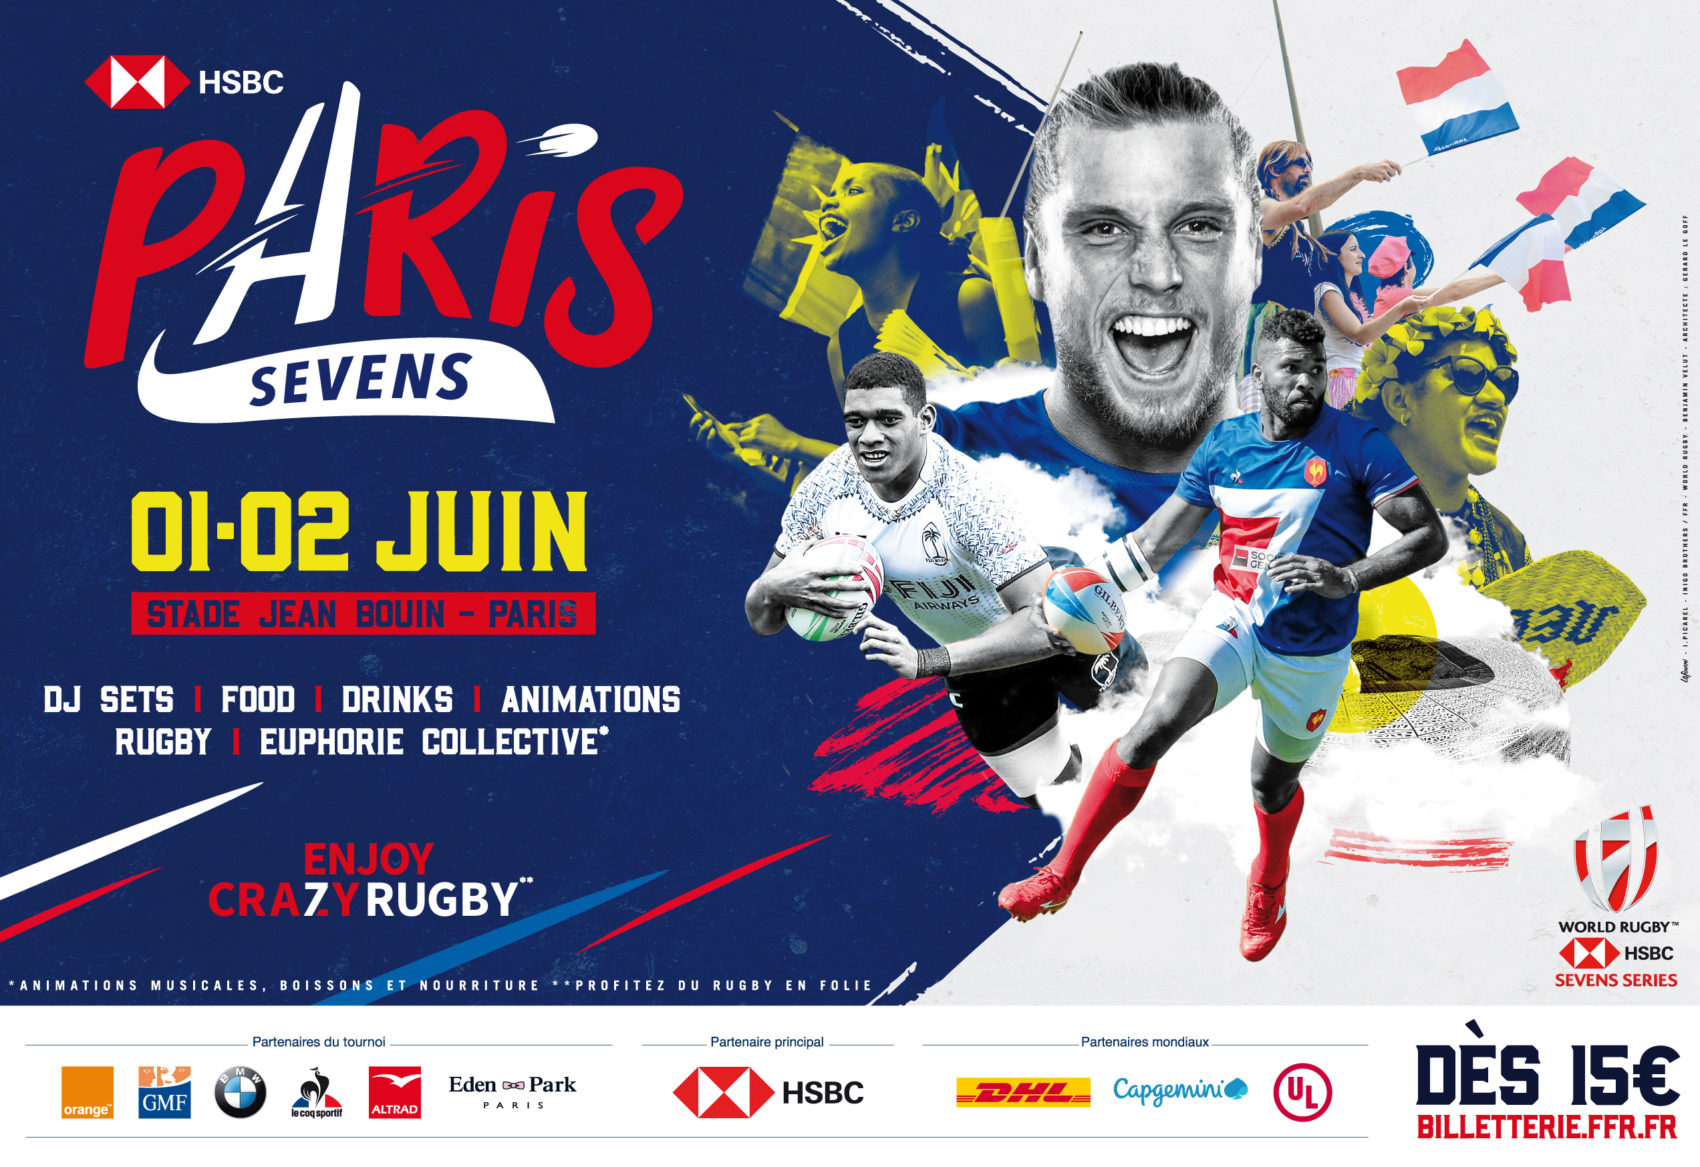 Projet_visuel_1_Federation_Francaise_Rugby_Paris_Biarritz_sevens_french_rugby